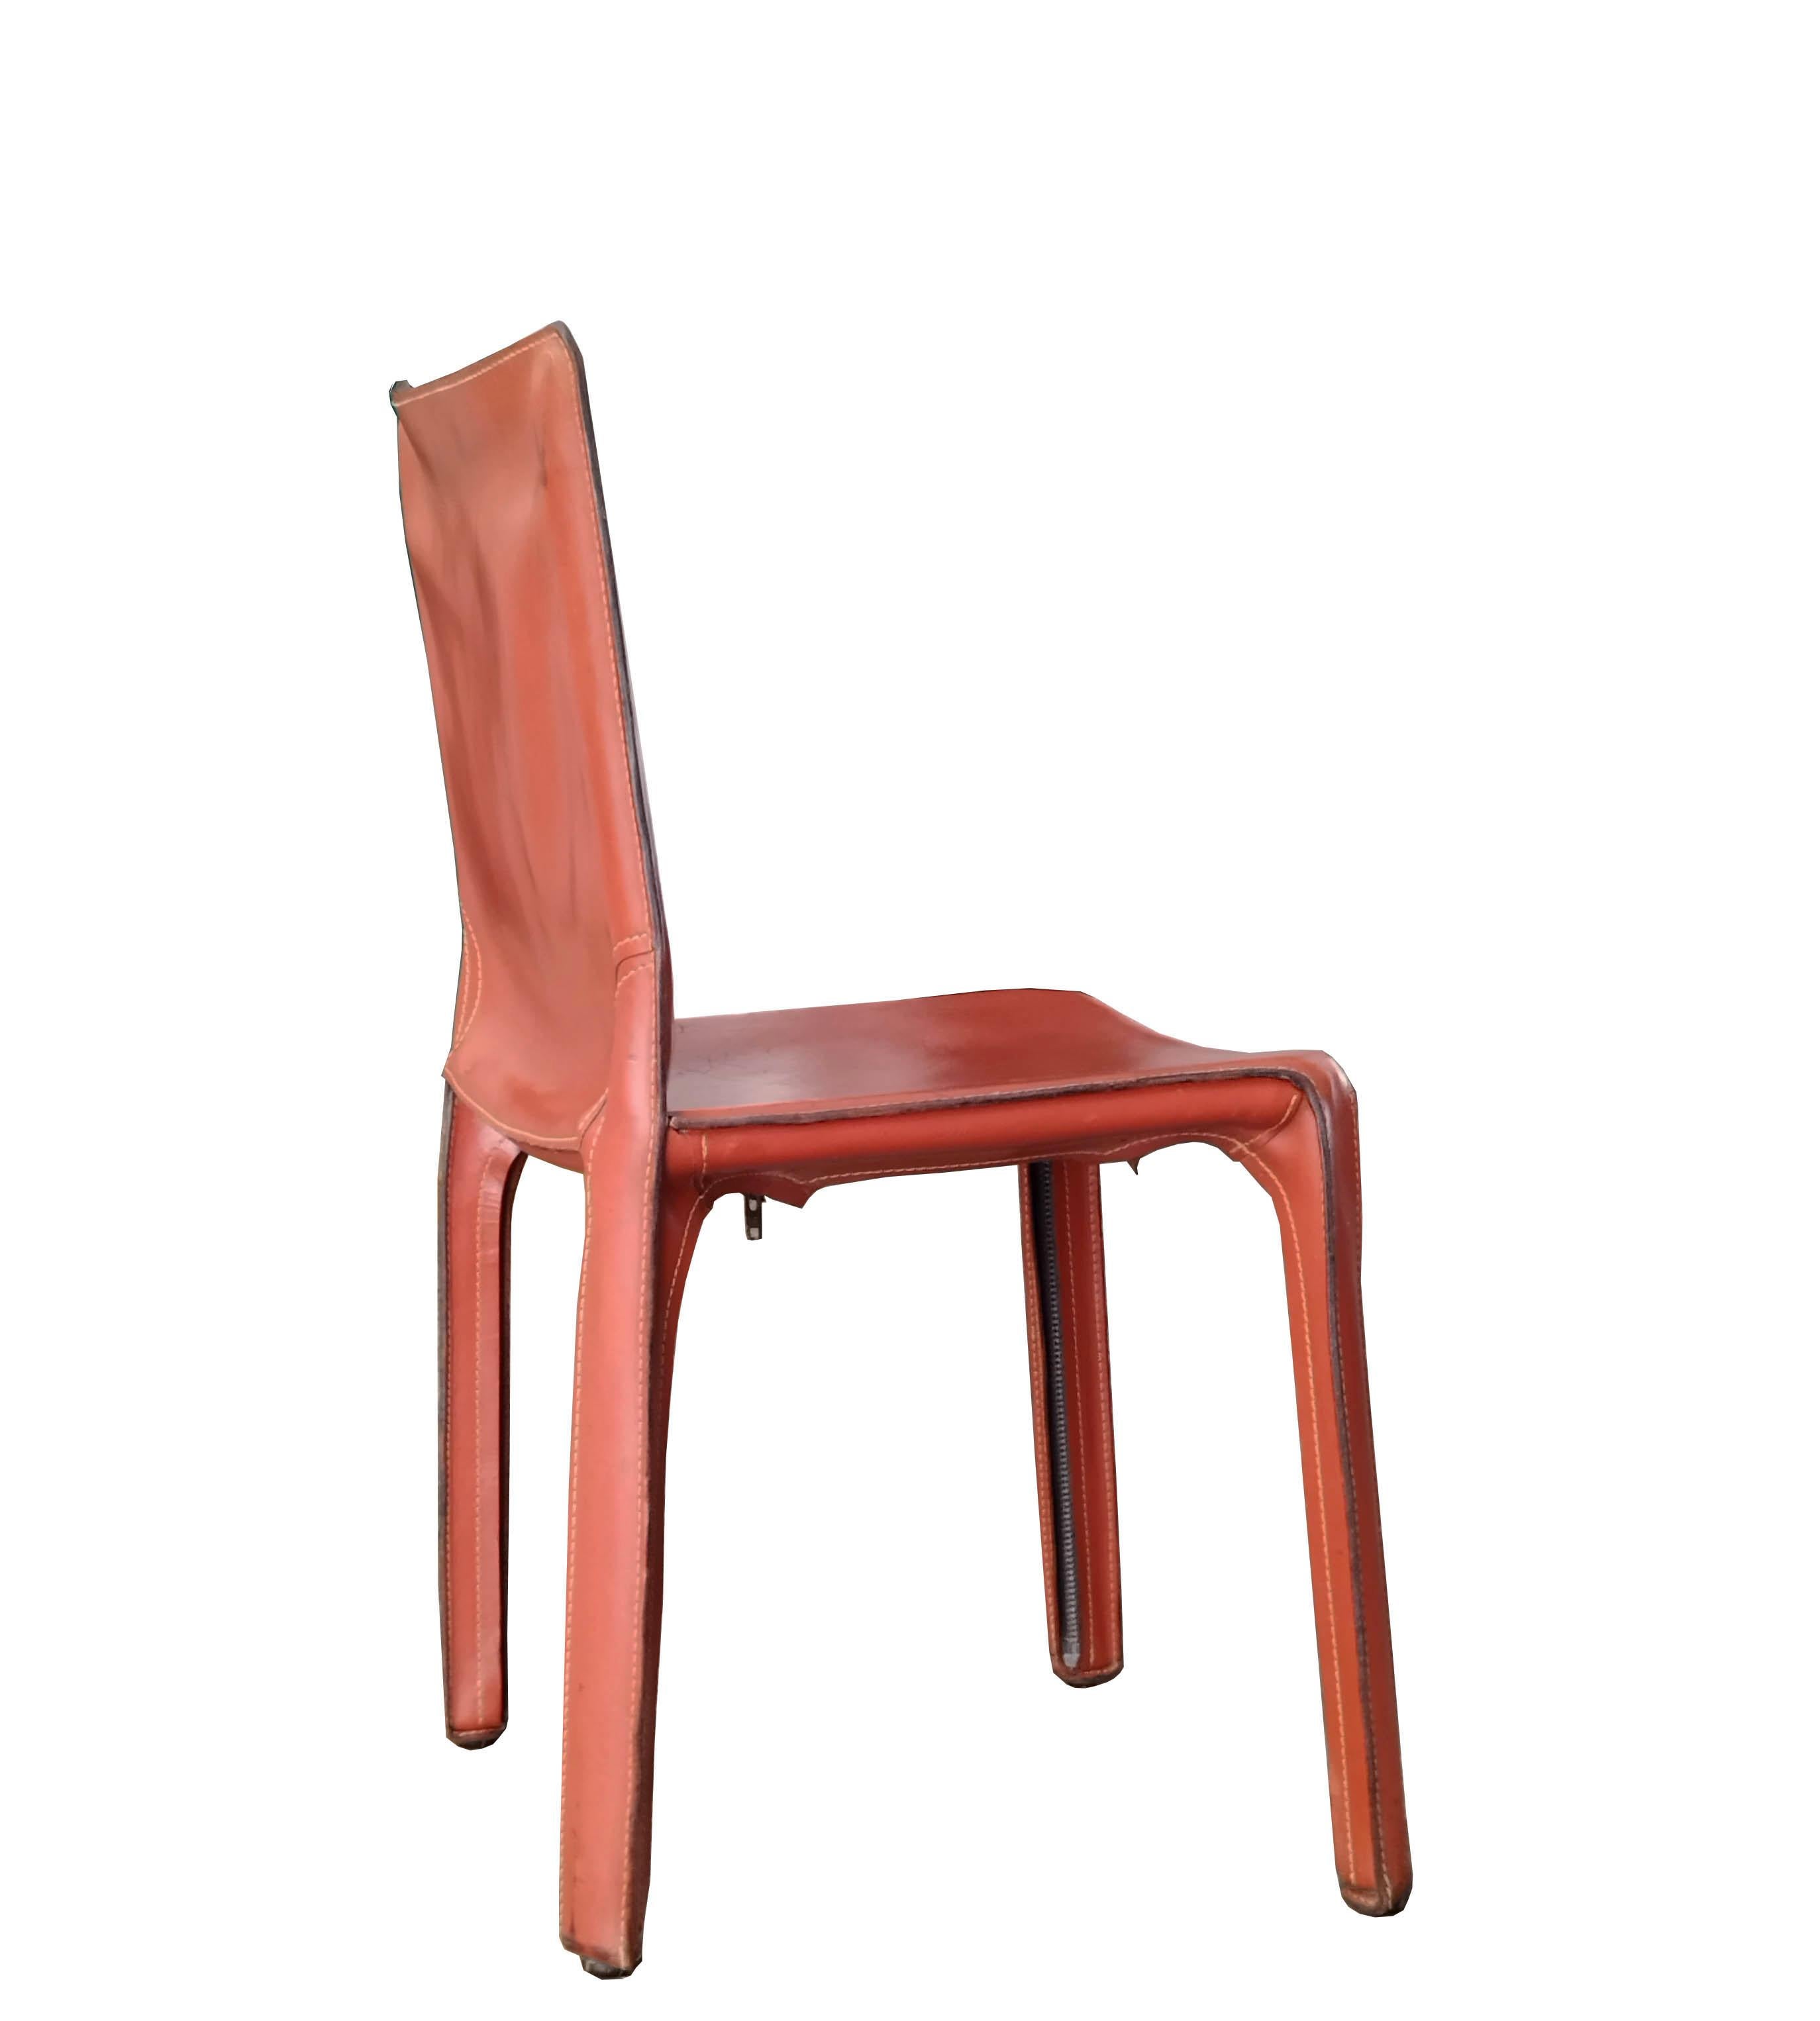 Italian Mario Bellini for Cassina Cab Dining Chair Mod.412, Italy, 1978 For Sale